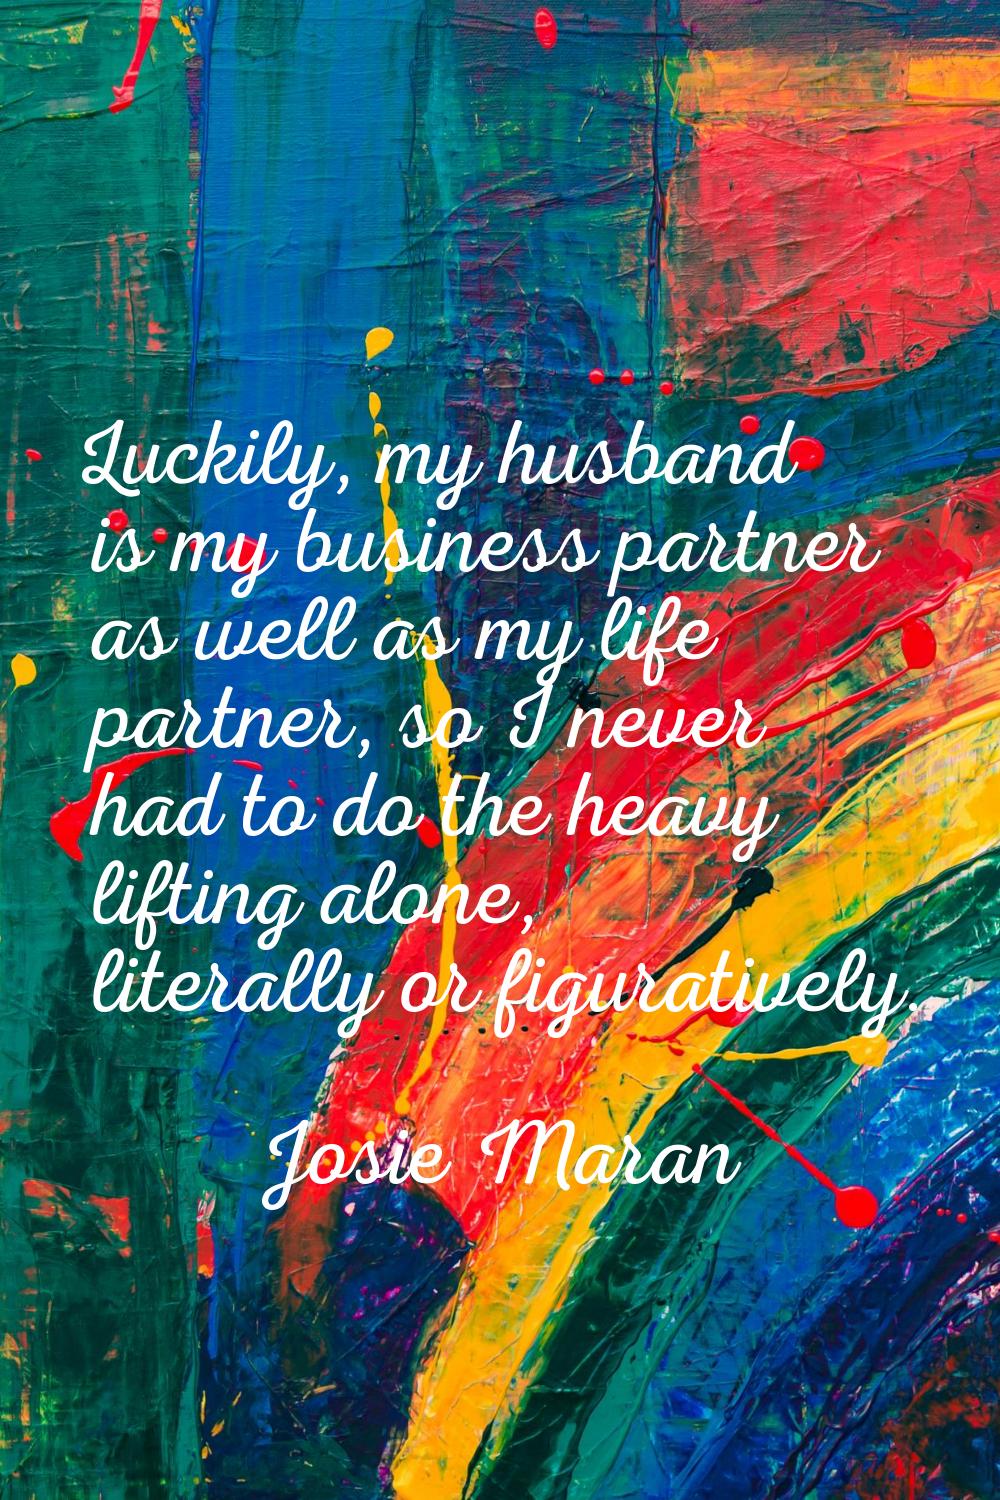 Luckily, my husband is my business partner as well as my life partner, so I never had to do the hea